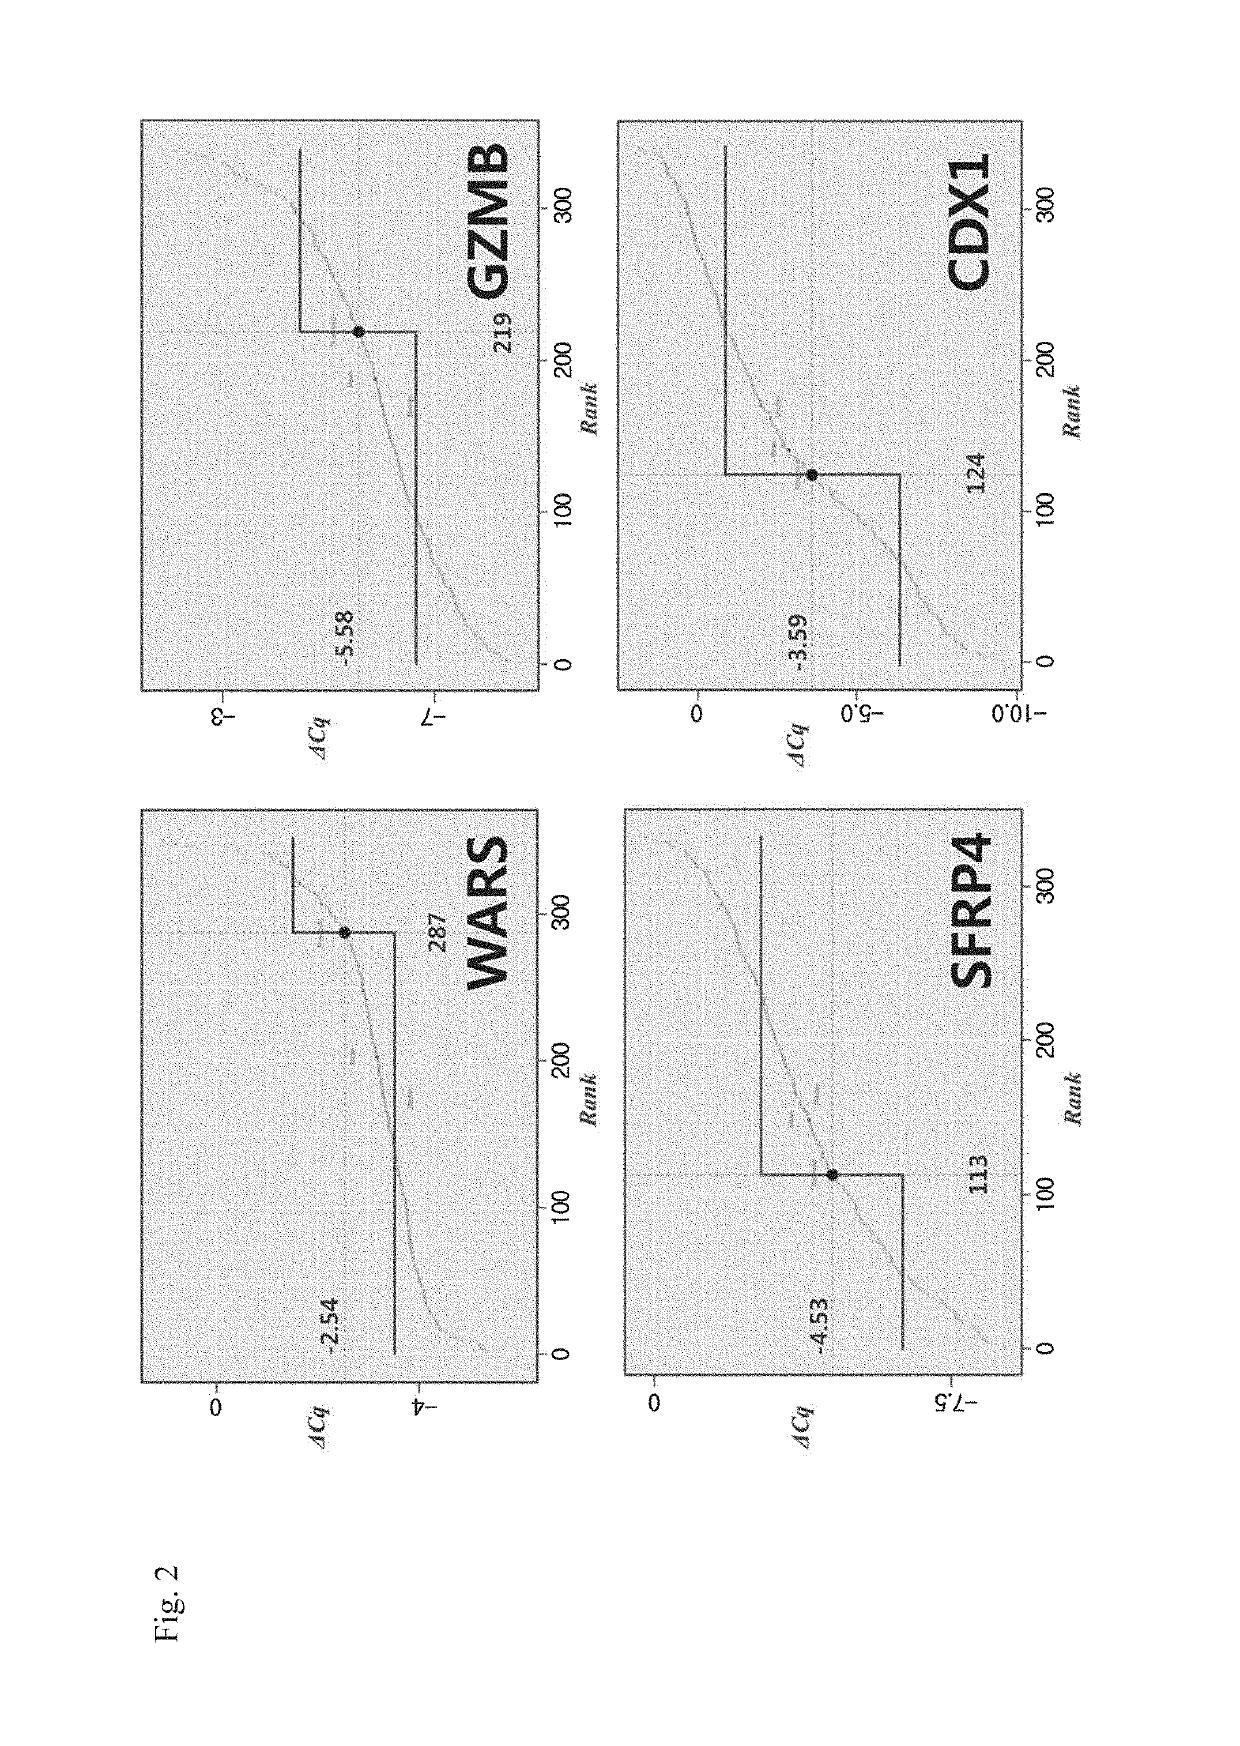 System for predicting post-surgery prognosis or anticancer drug compatibility of advanced gastric cancer patients